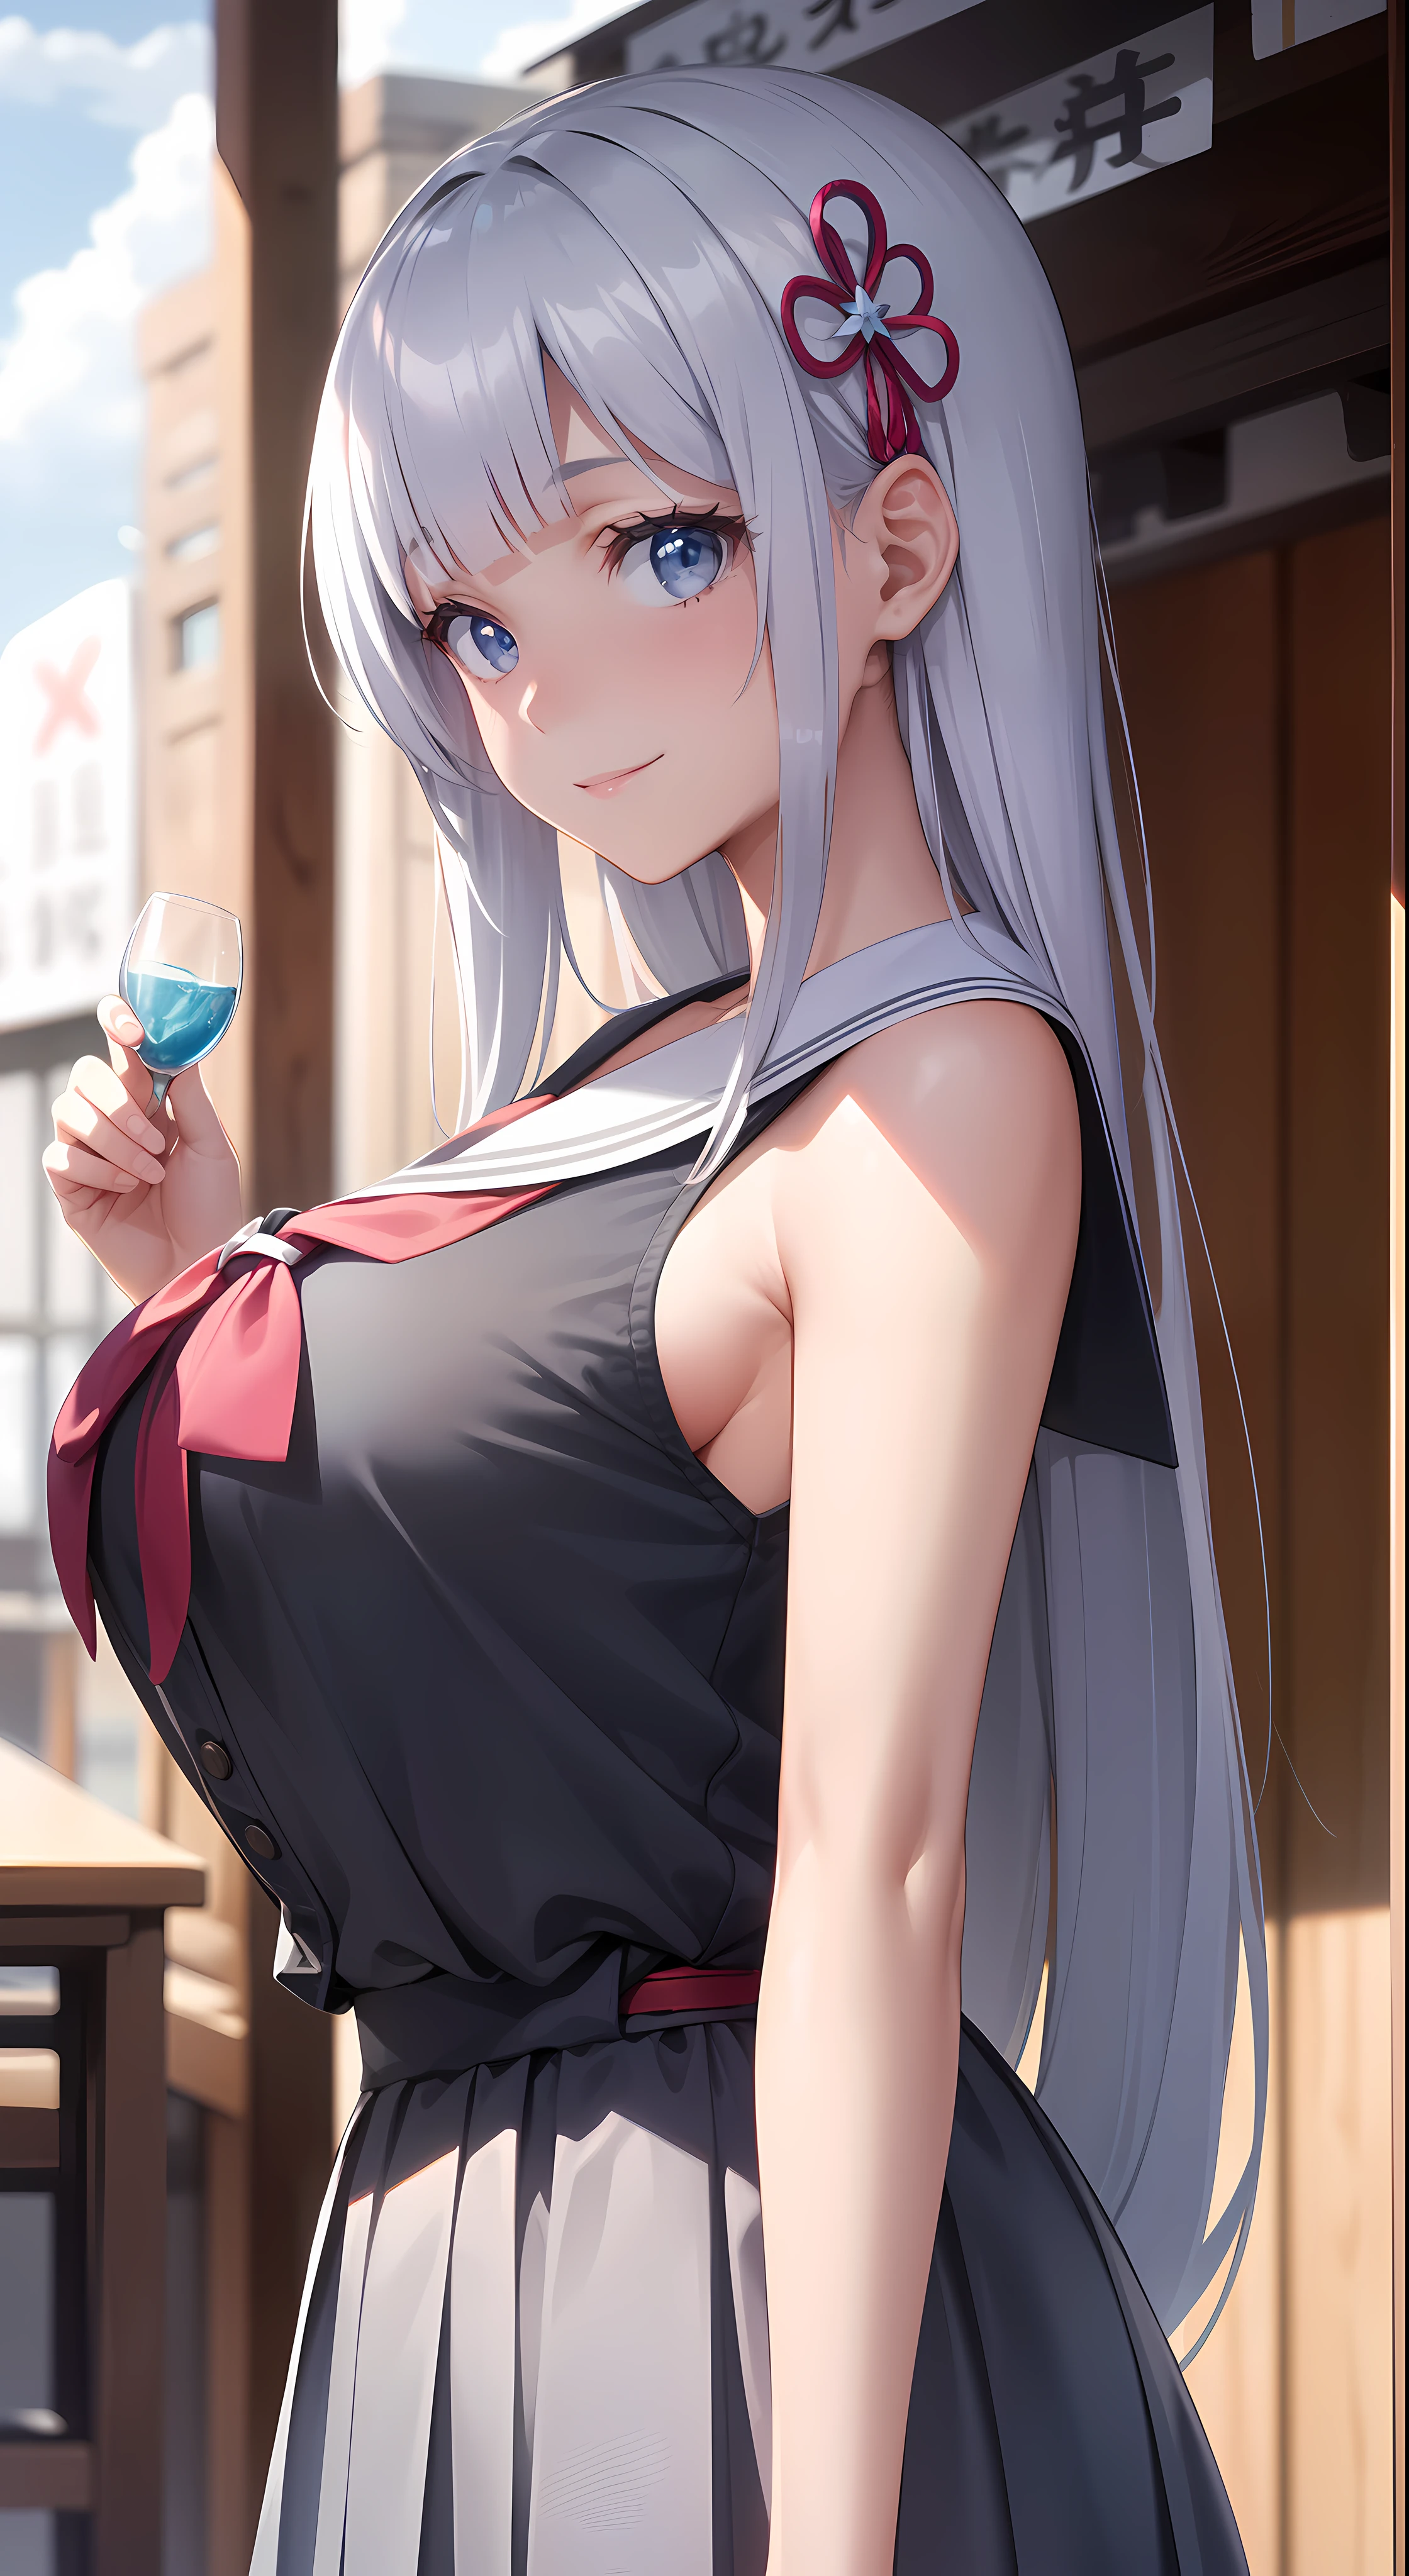 Anime Schoolgirl Big Tits - Anime girl with long gray hair and blue eyes holding a glass - SeaArt AI